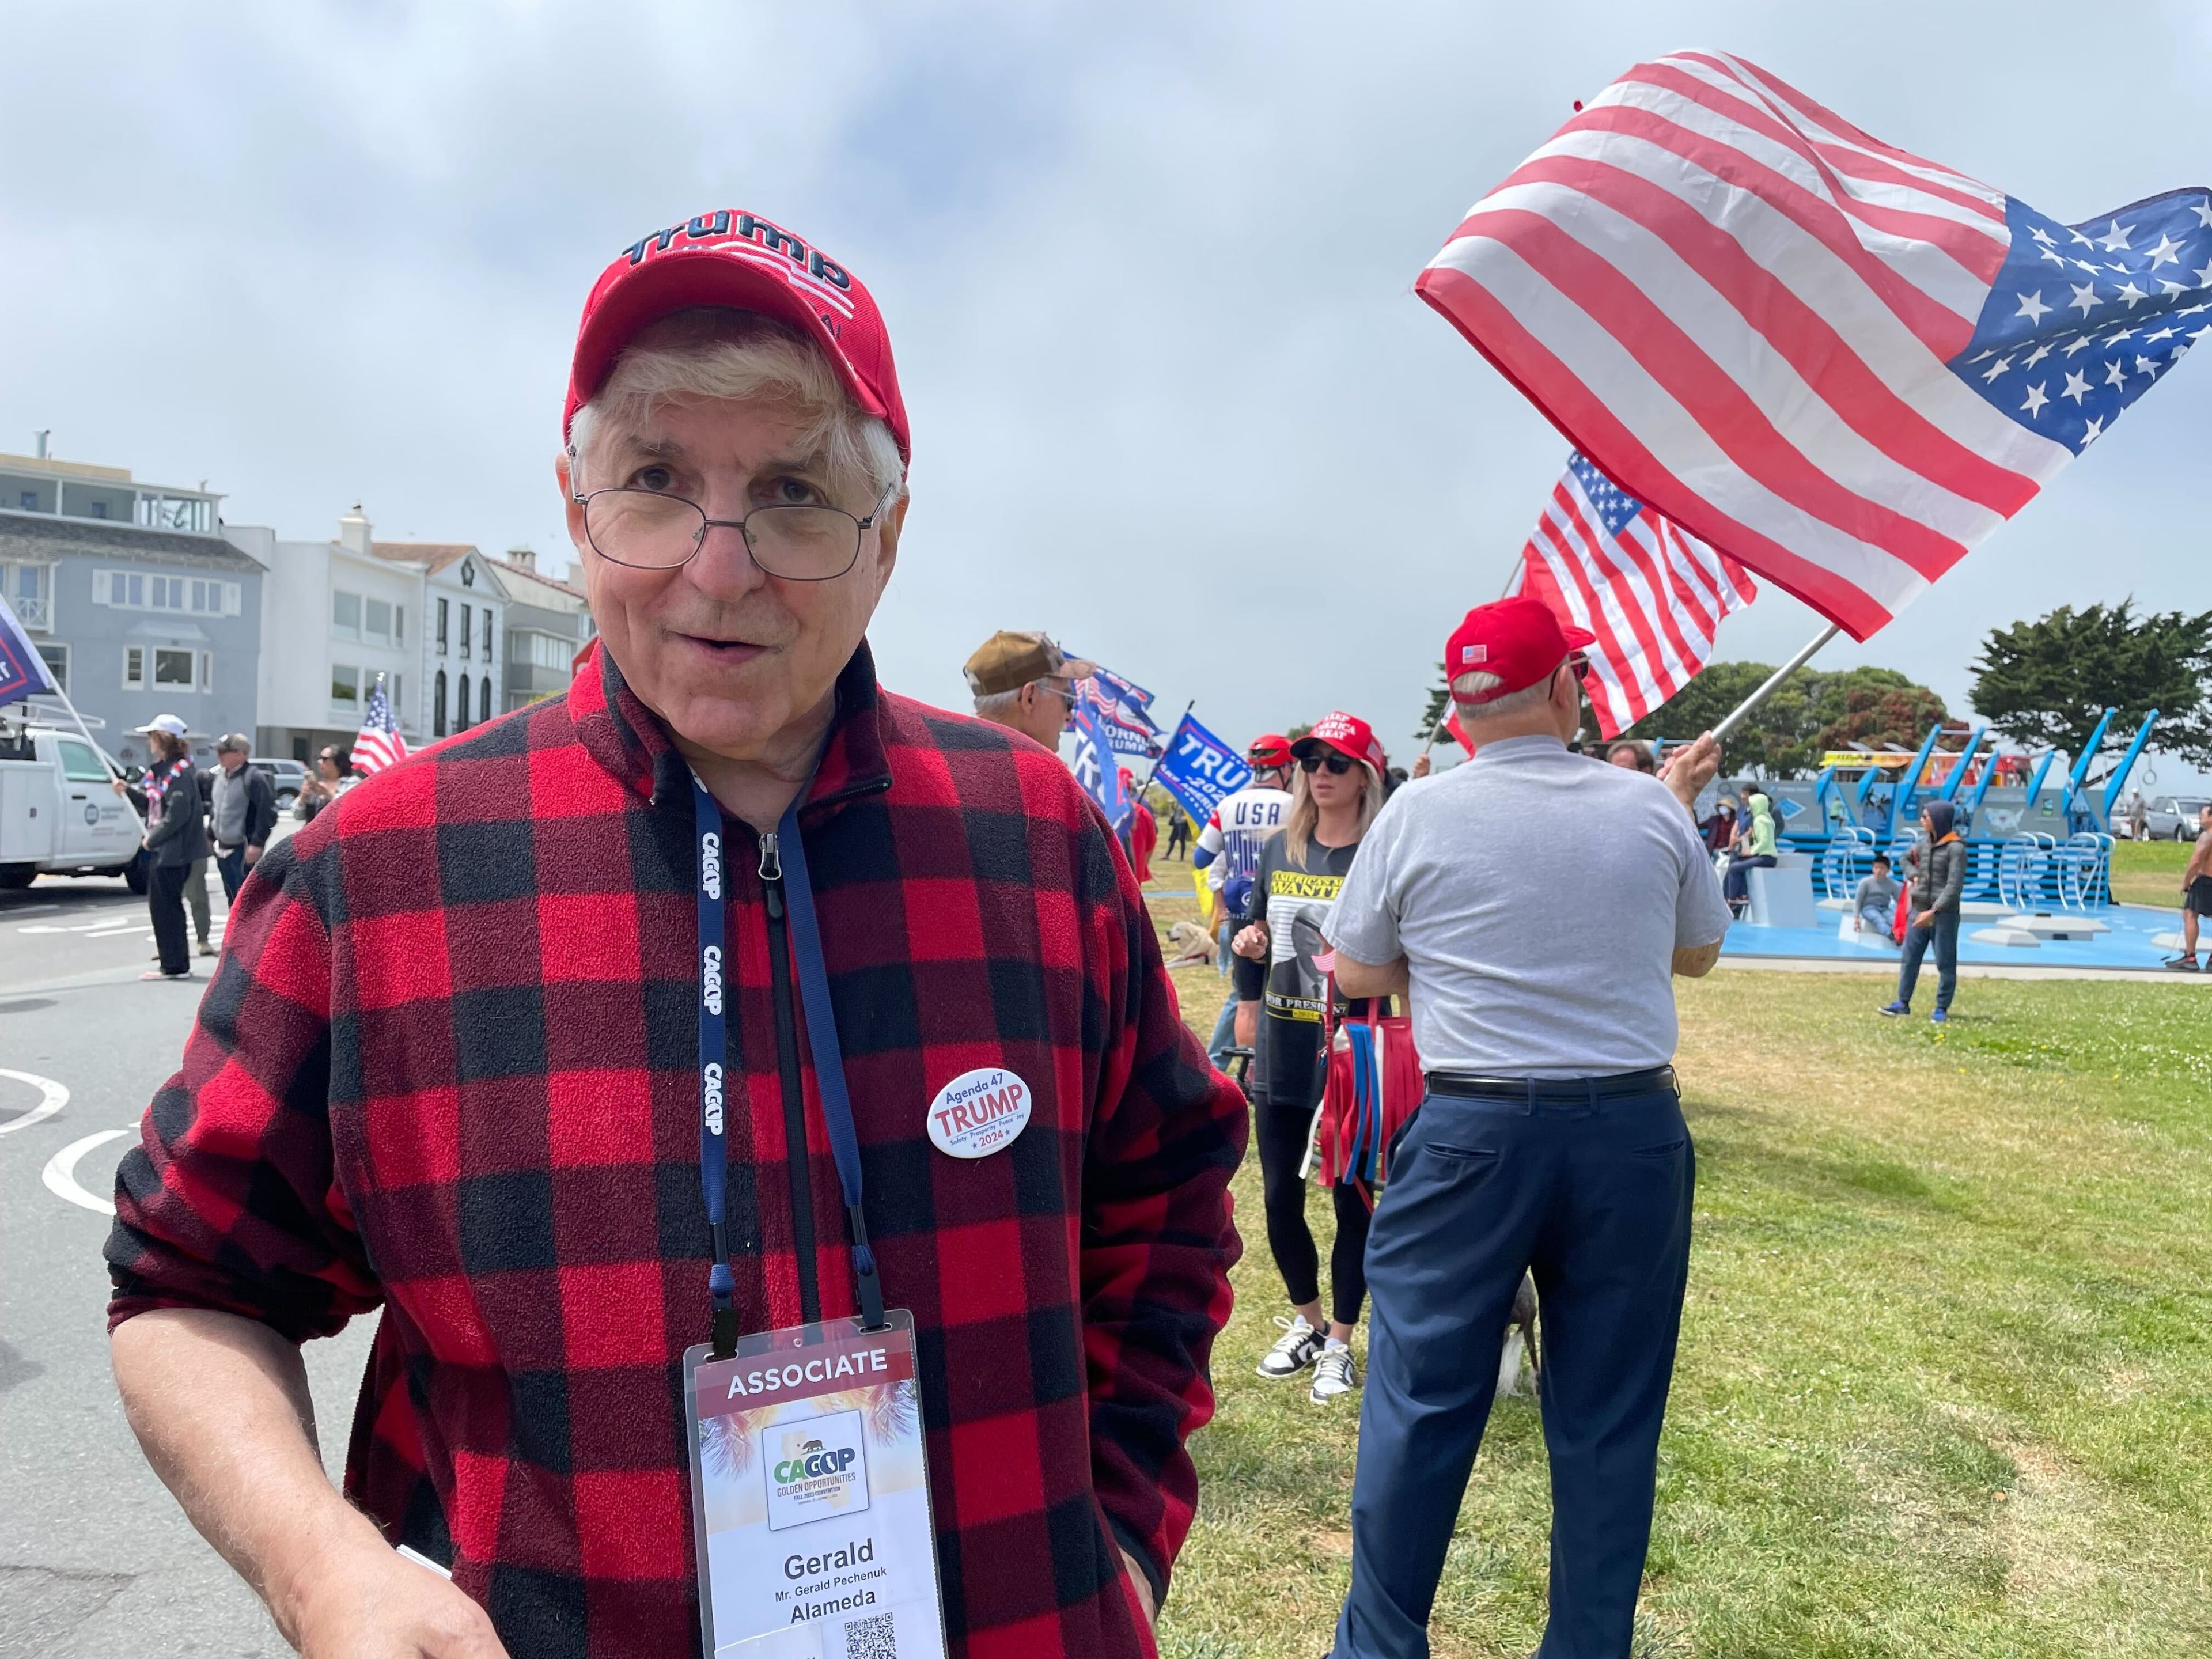 An older man in a red plaid shirt and red cap stands in the foreground, with numerous American flags and people in the background at an outdoor event.